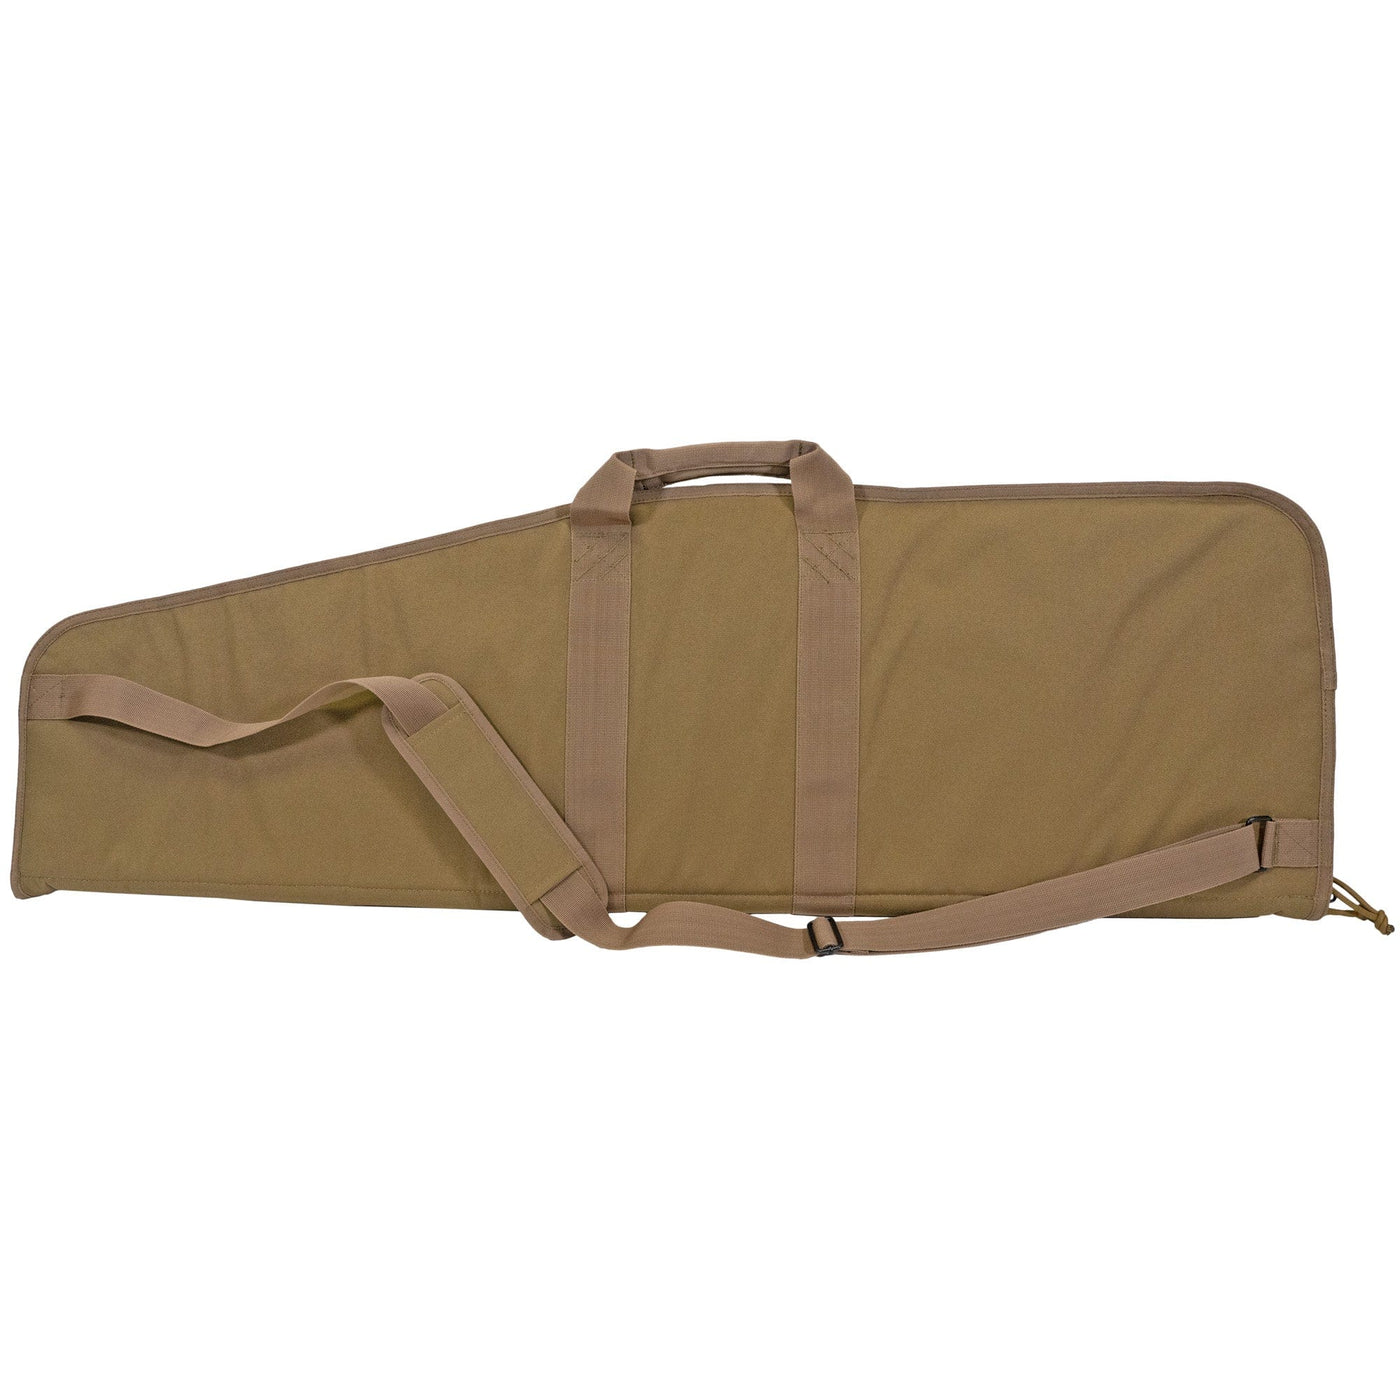 GPS Outdoors GPS Outdoors 42in Single Rifle Case Flat dark earth Shooting